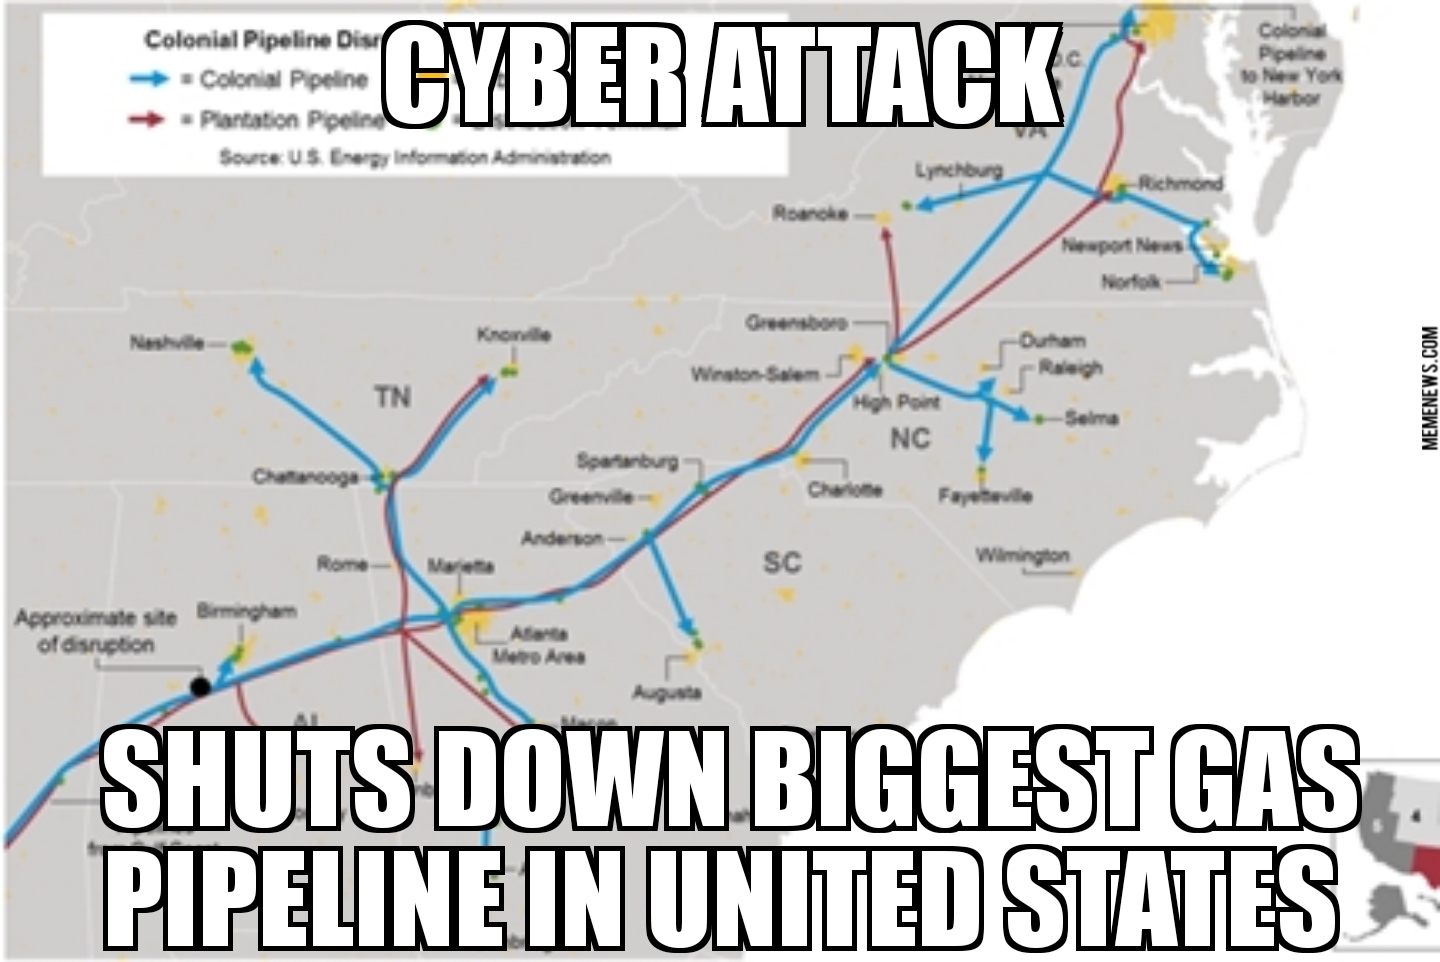 Colonial Pipeline cyber attack